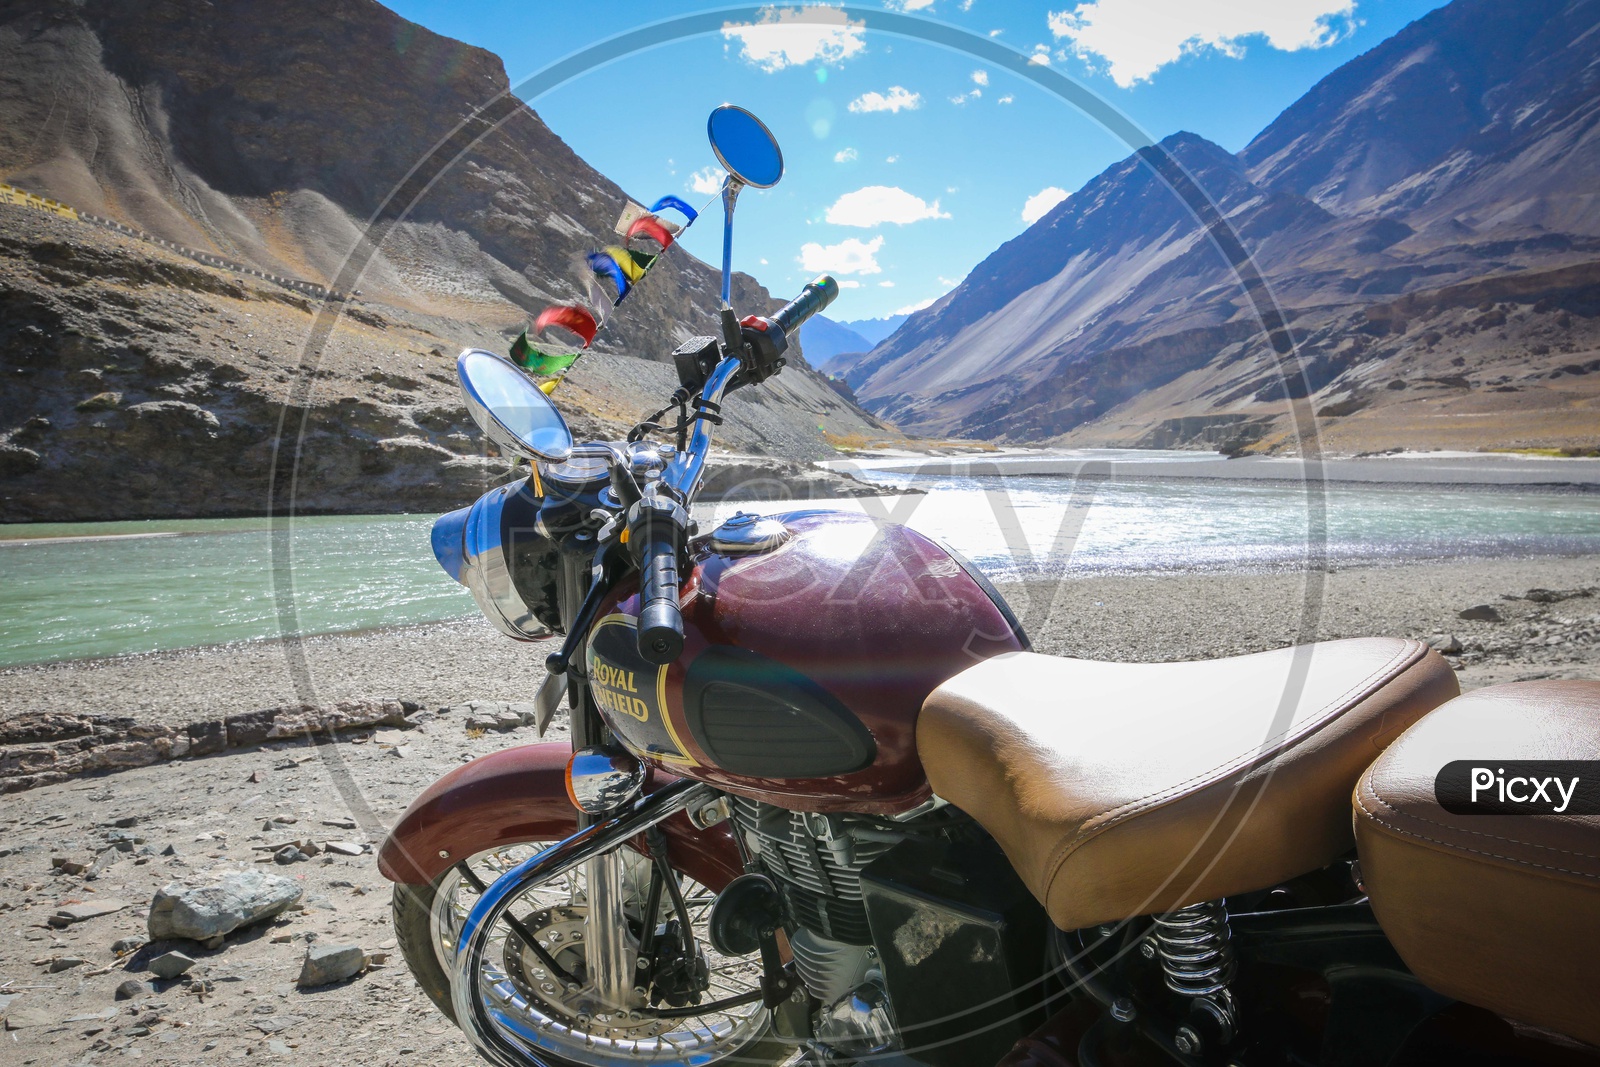 Royal enfield bullet amidst hills and mountains of Leh Ladakh